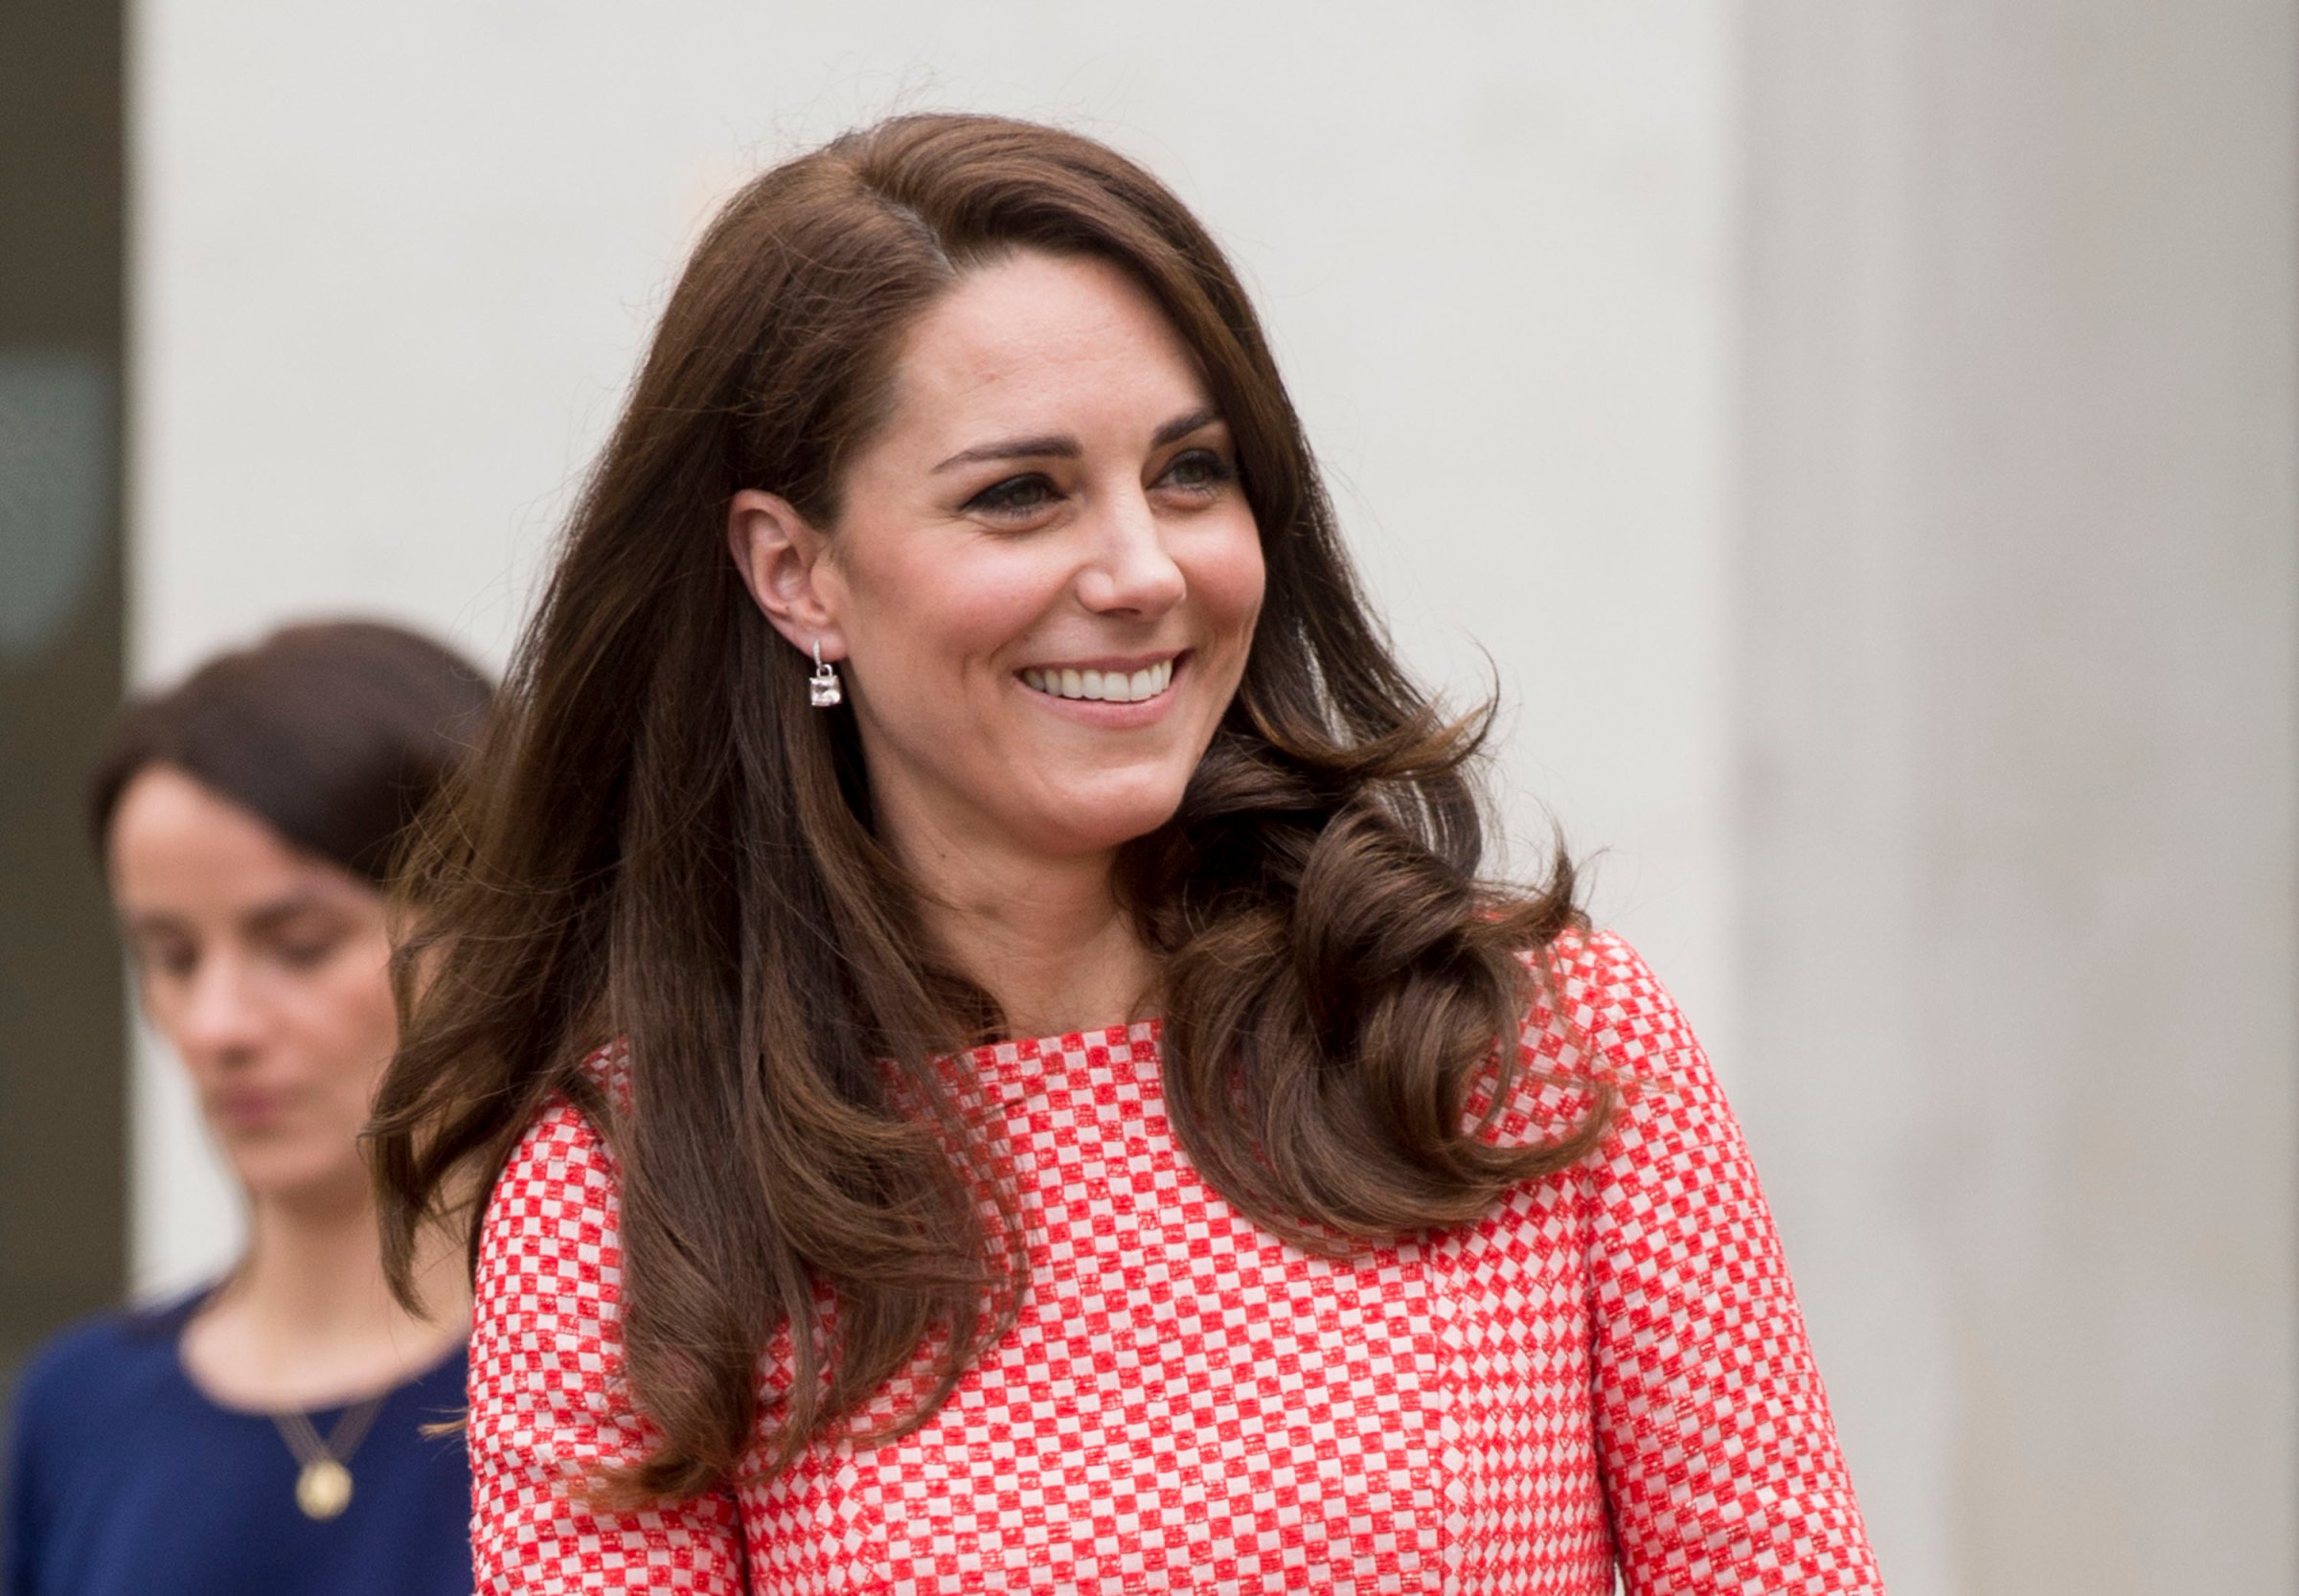 The Duchess Of Cambridge Attends Launch Of Maternal Mental Health Films With Best Beginnings And Heads Together